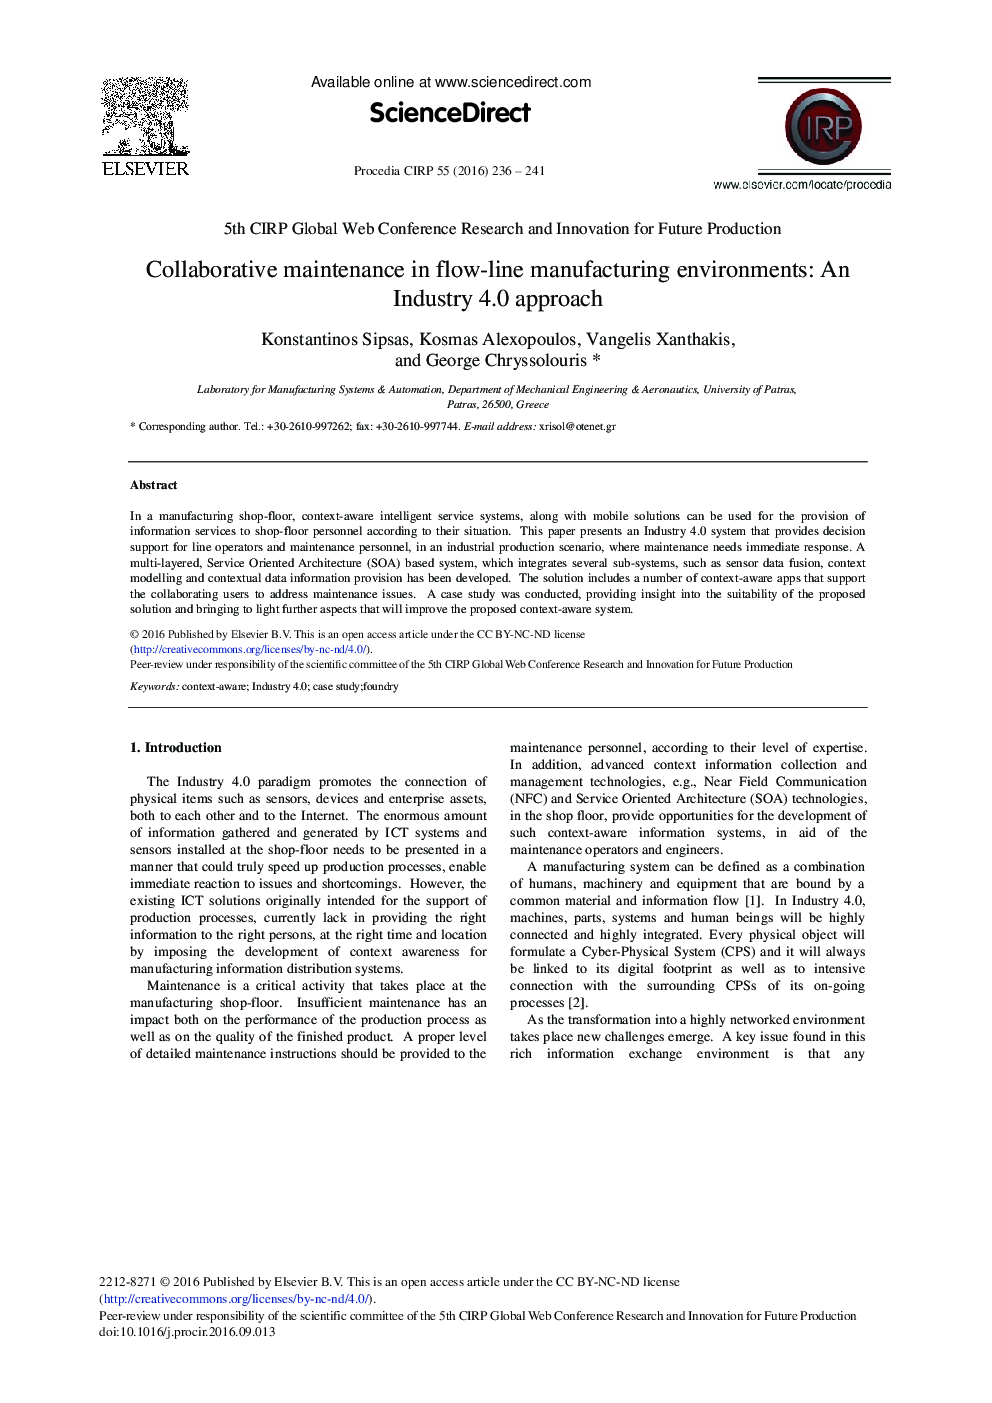 Collaborative Maintenance in flow-line Manufacturing Environments: An Industry 4.0 Approach